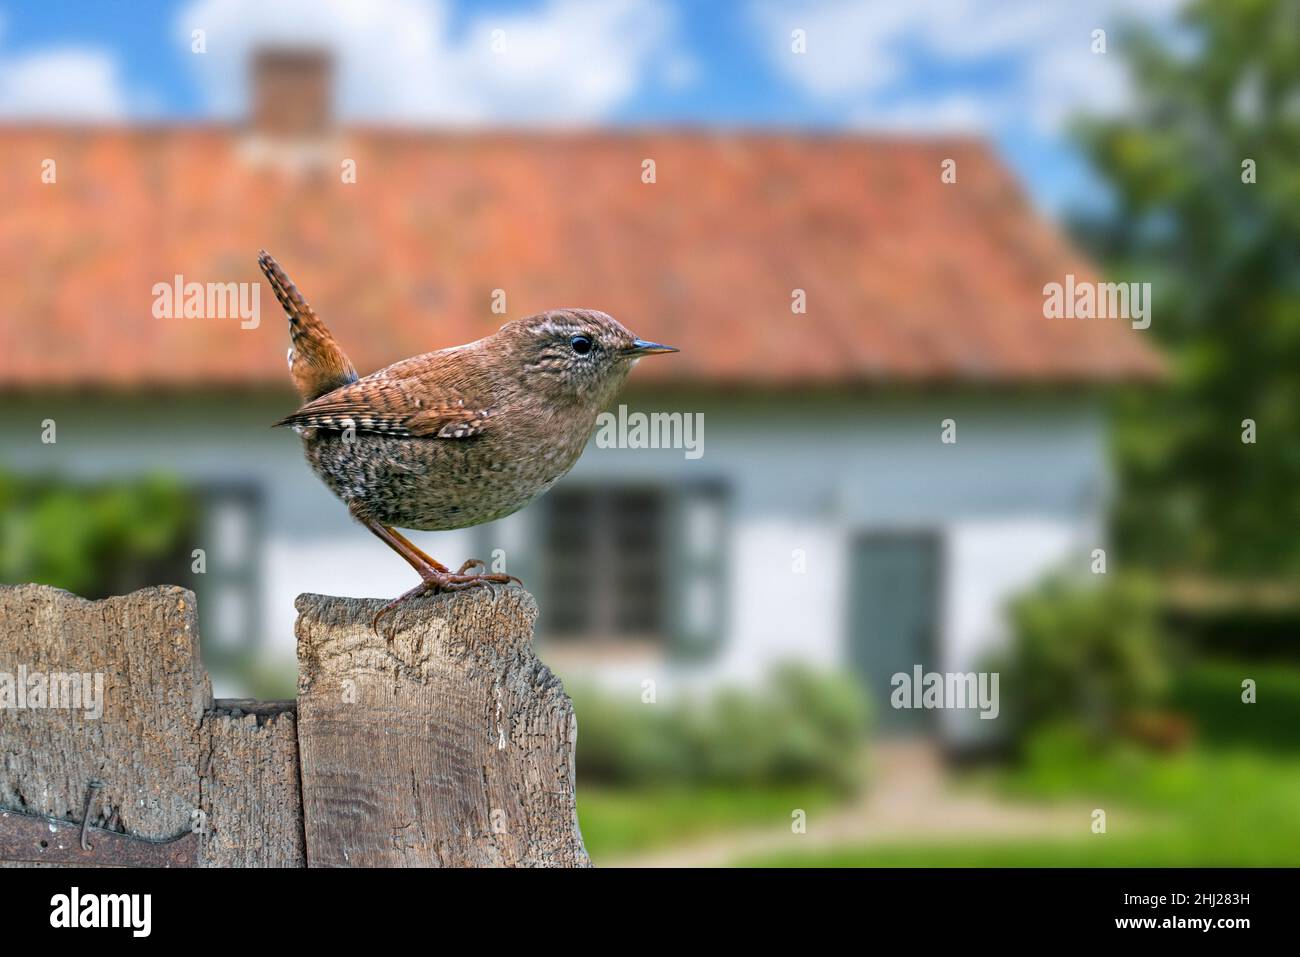 Eurasian wren (Troglodytes troglodytes / Nannus troglodytes) perched on old weathered wooden garden fence of house in the countryside Stock Photo